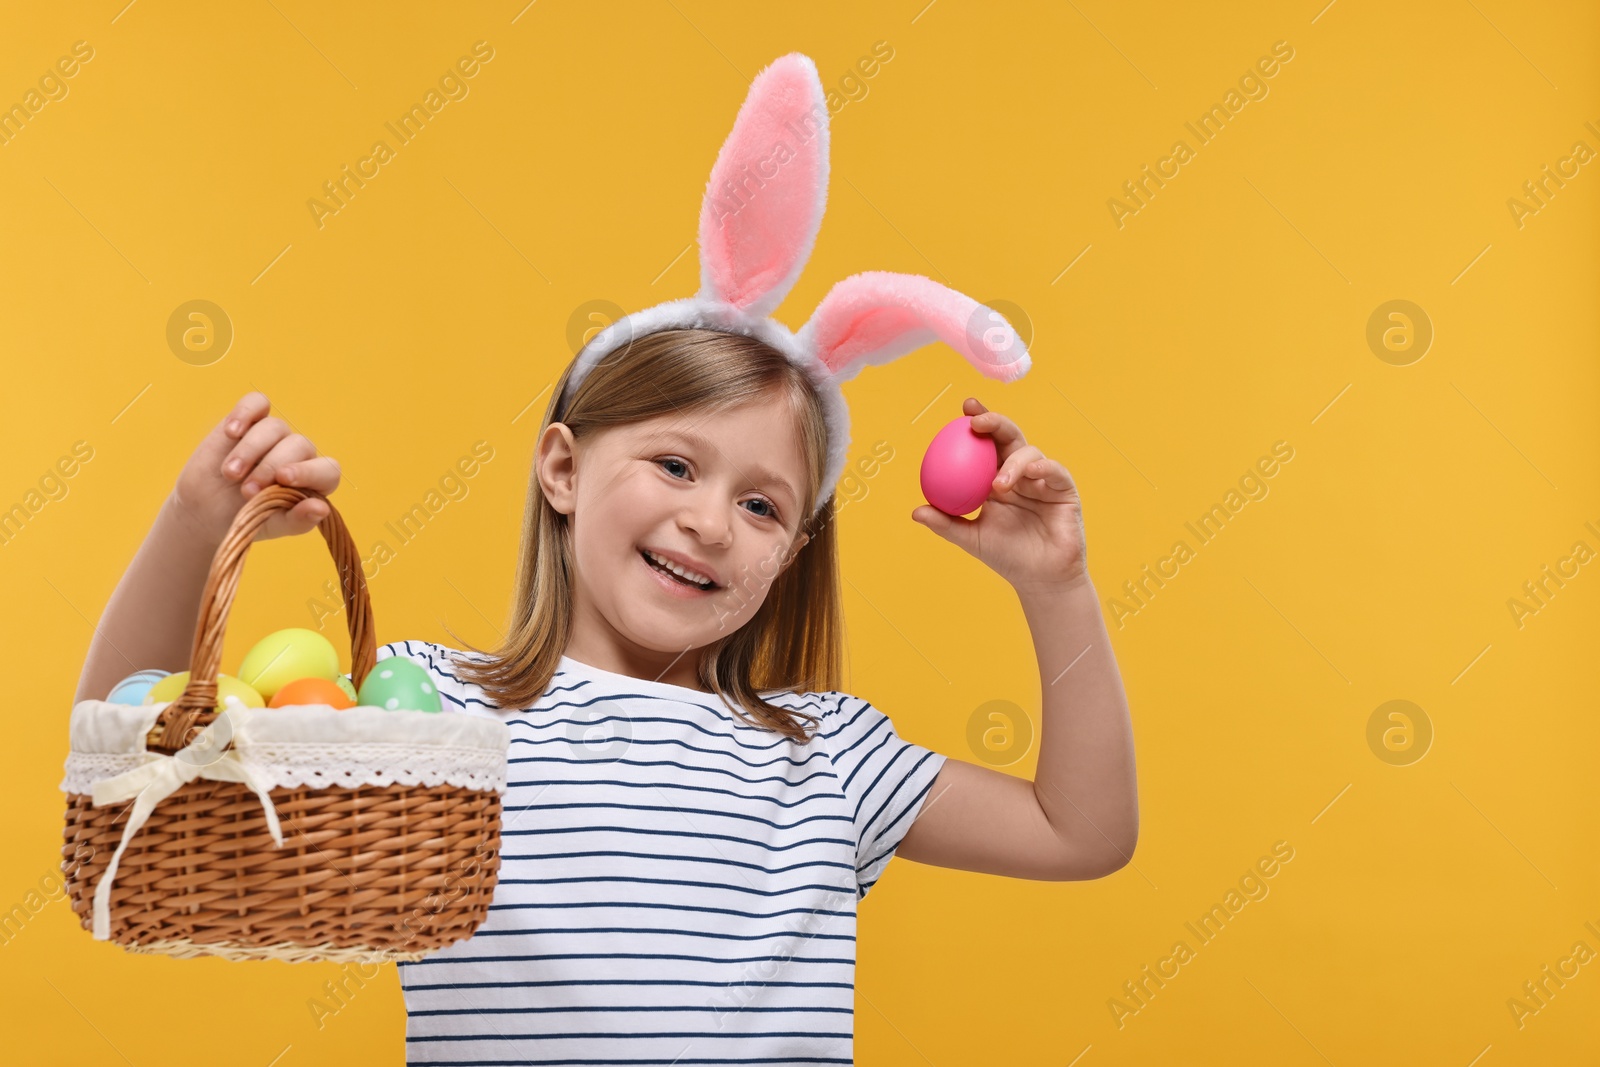 Photo of Easter celebration. Cute girl with bunny ears holding basket of painted eggs on orange background